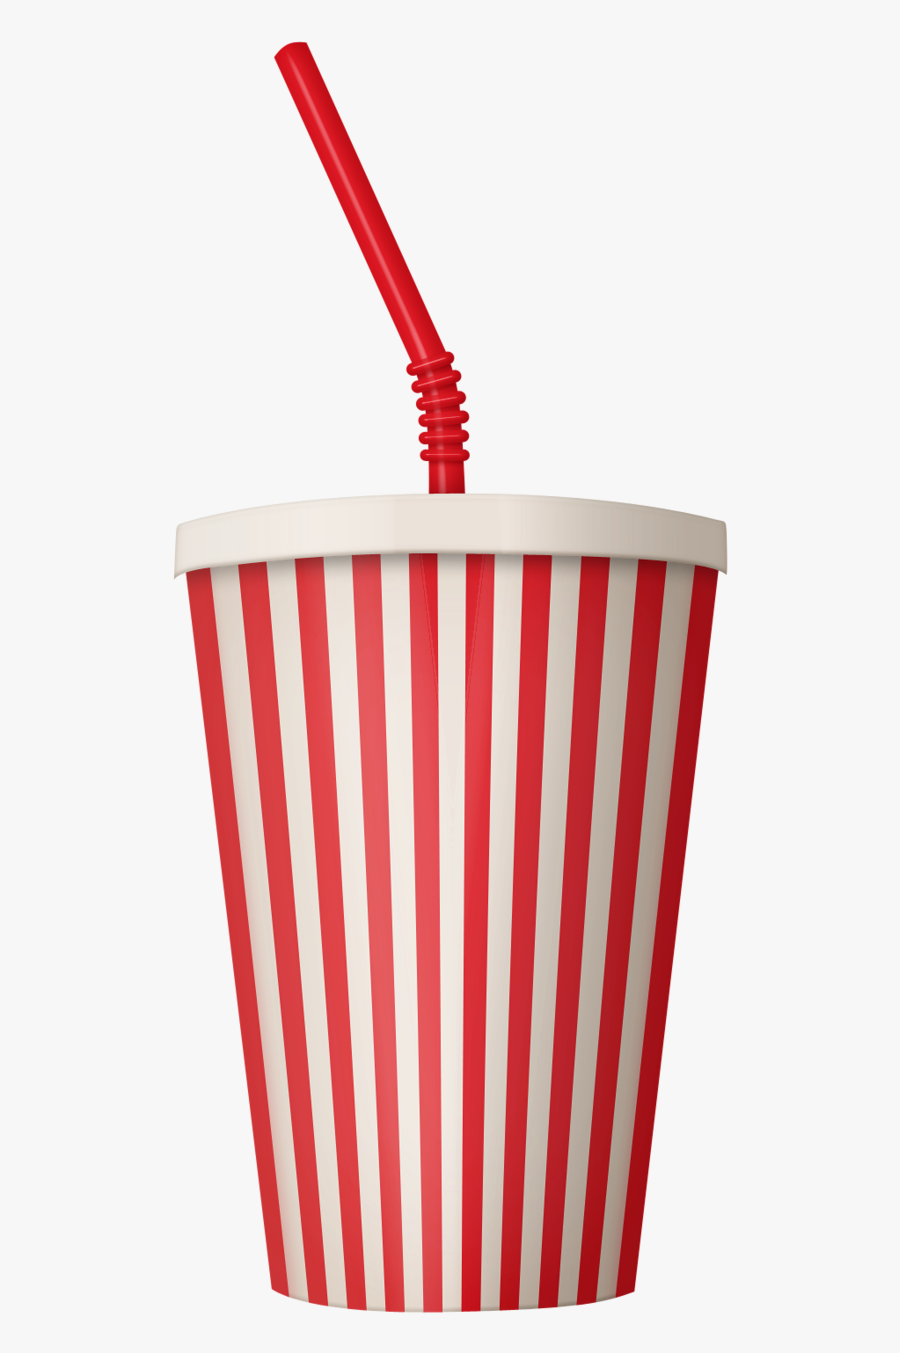 Drinking Clipart Drink - Drink Cup Vector Png, Transparent Clipart